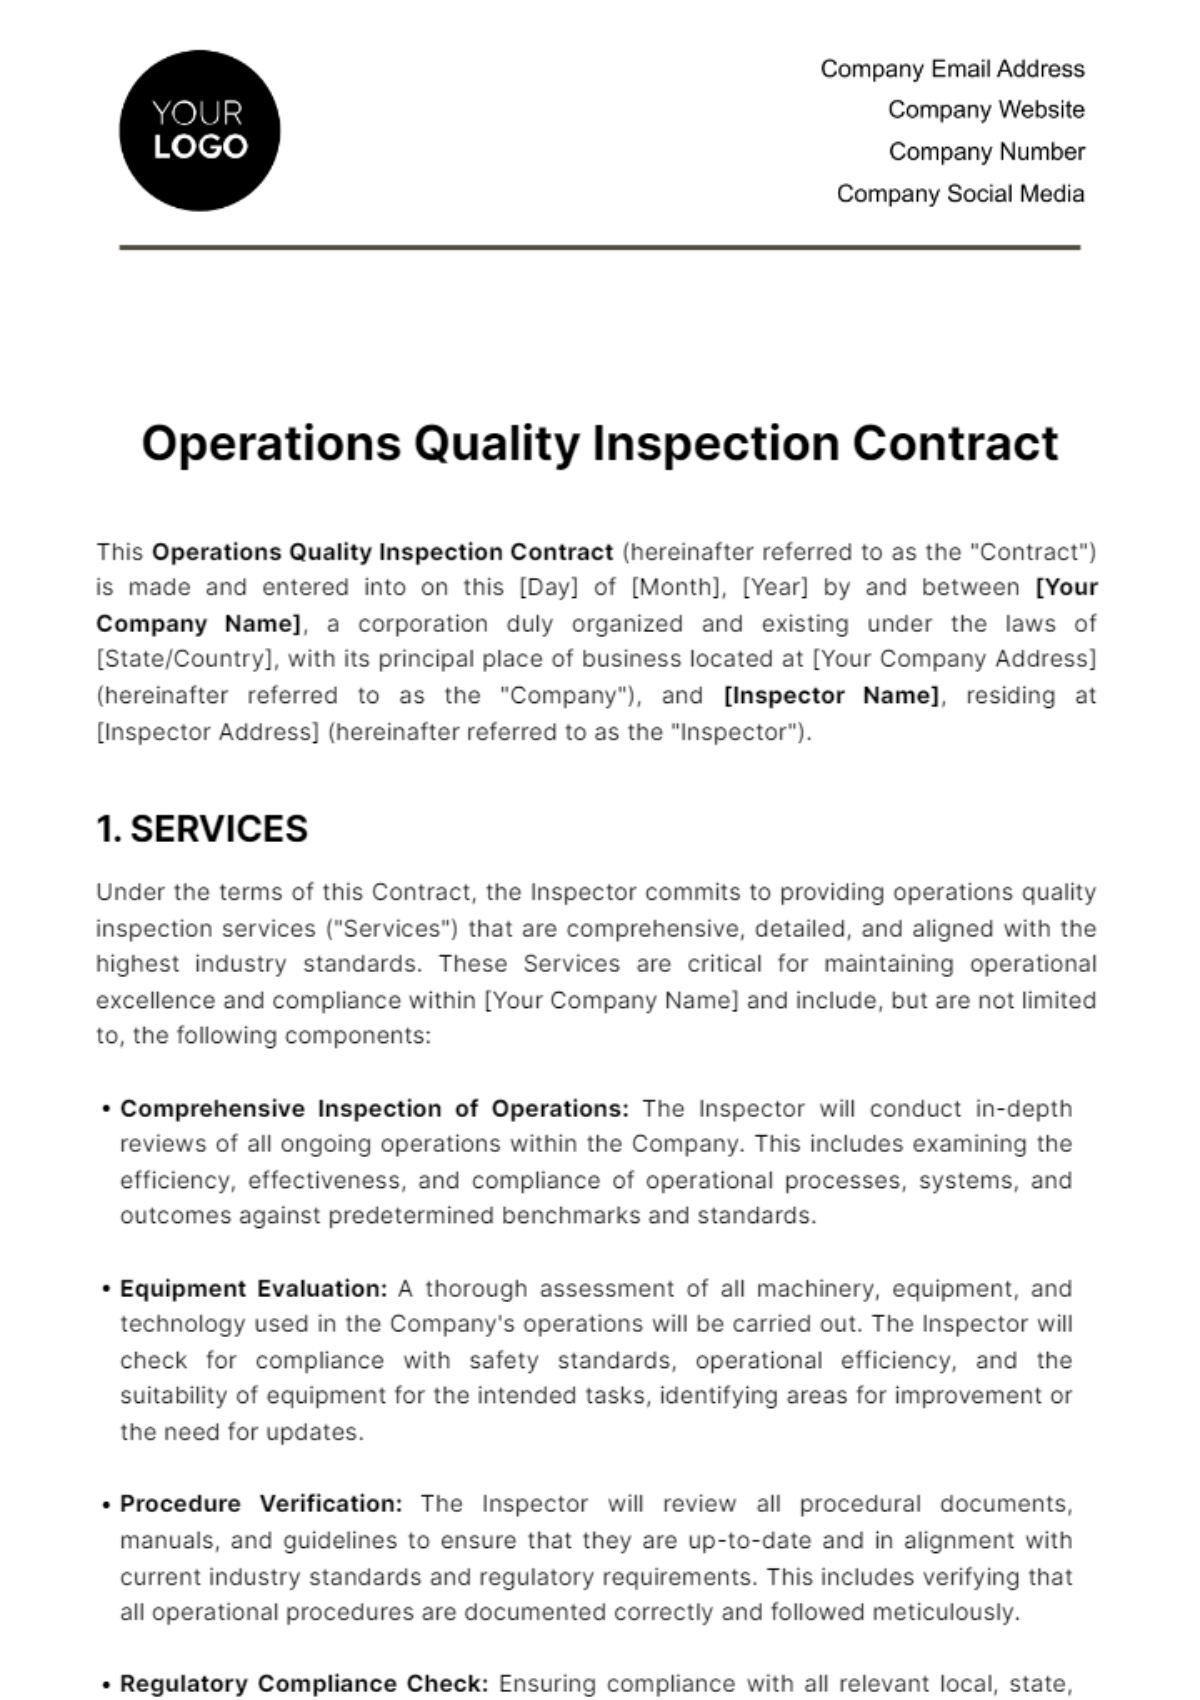 Operations Quality Inspection Contract Template